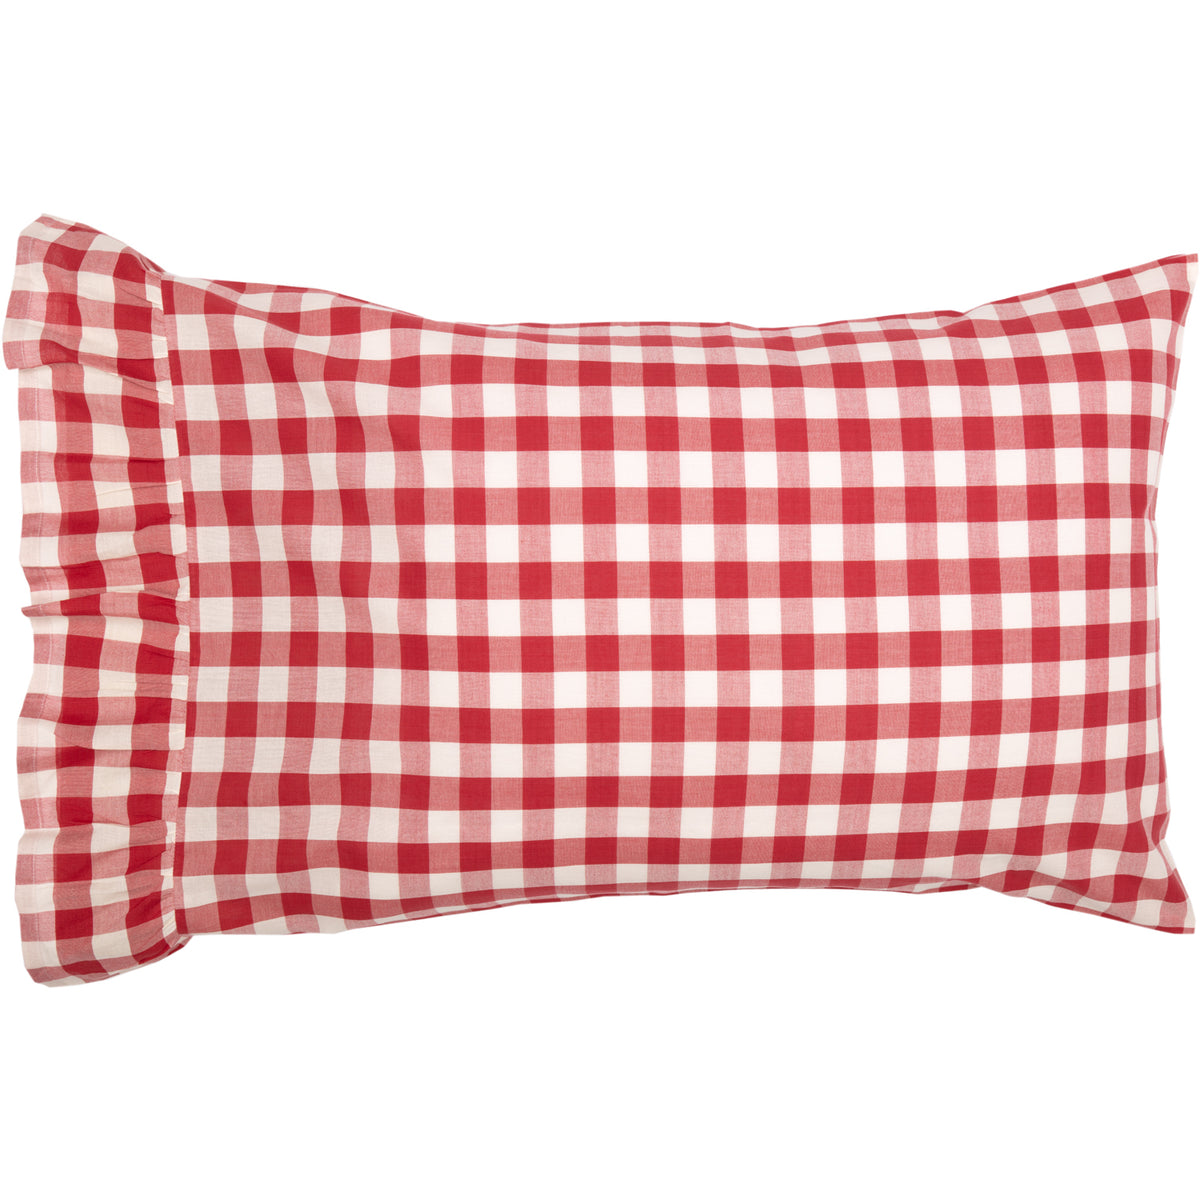 April & Olive Annie Buffalo Red Check Standard Pillow Case Set of 2 21x30+4 By VHC Brands